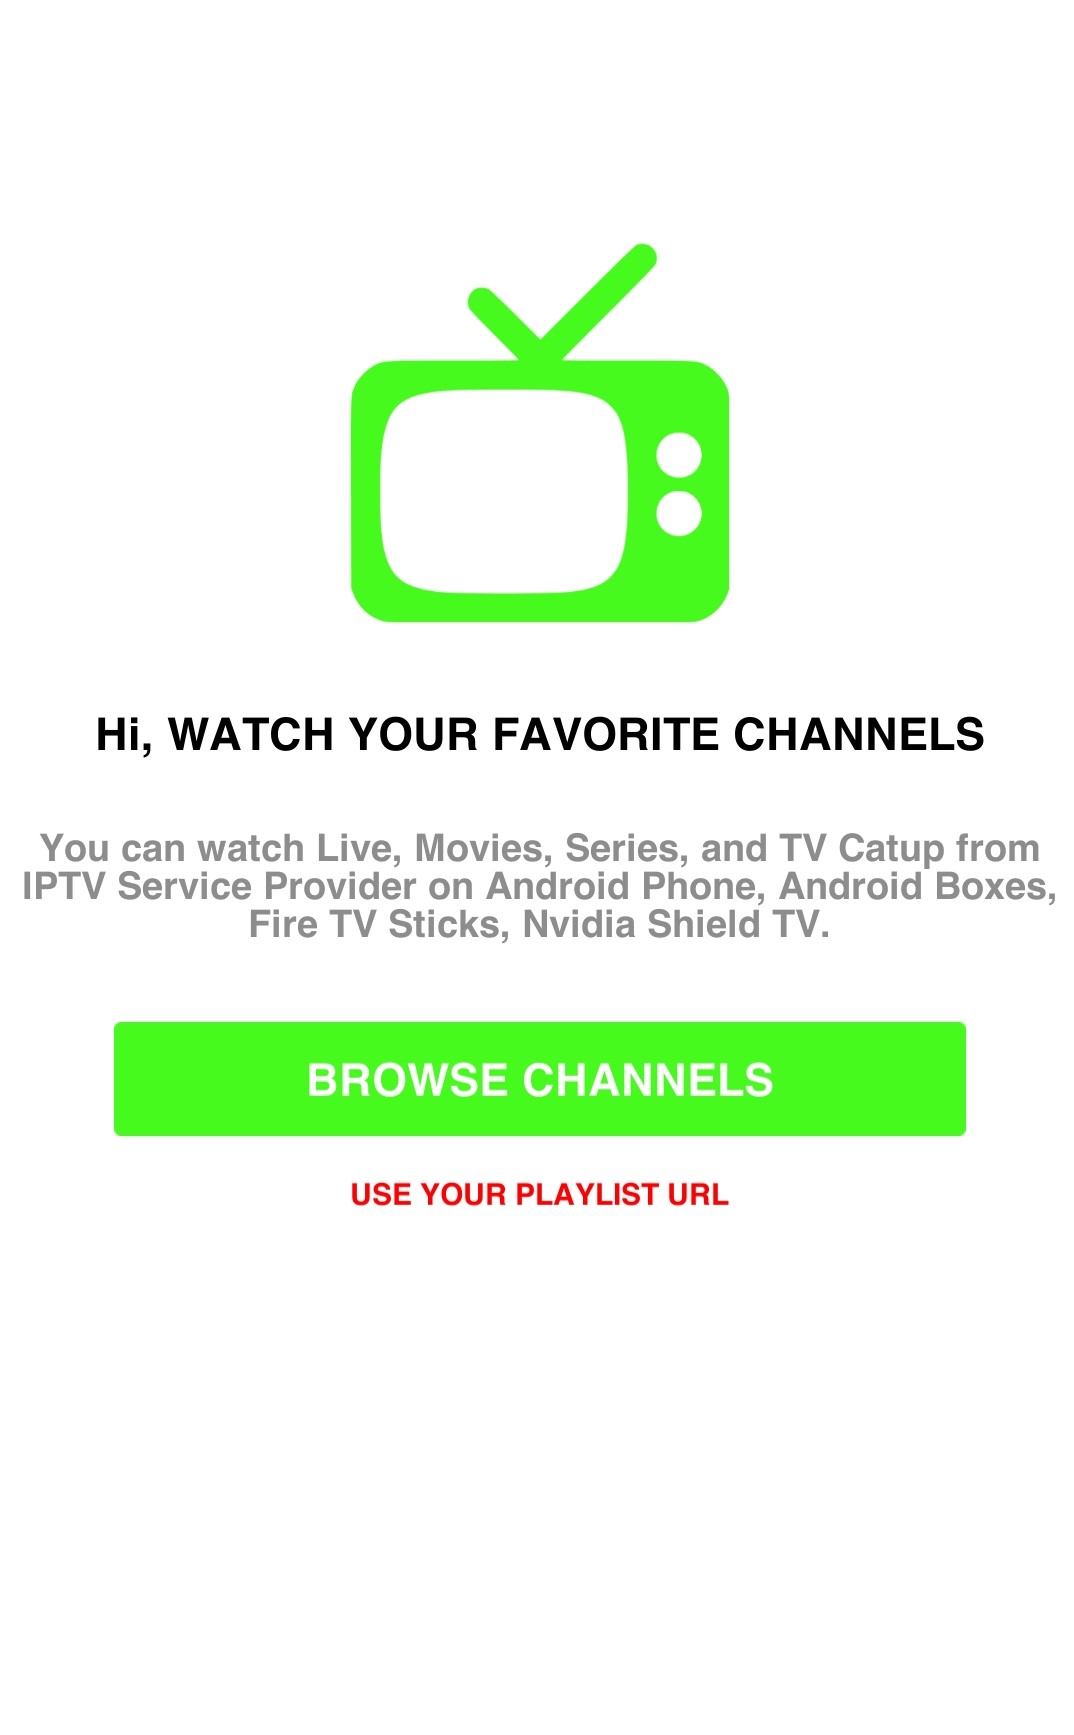 Select Use Your Playlist URL to stream Top TV IPTV